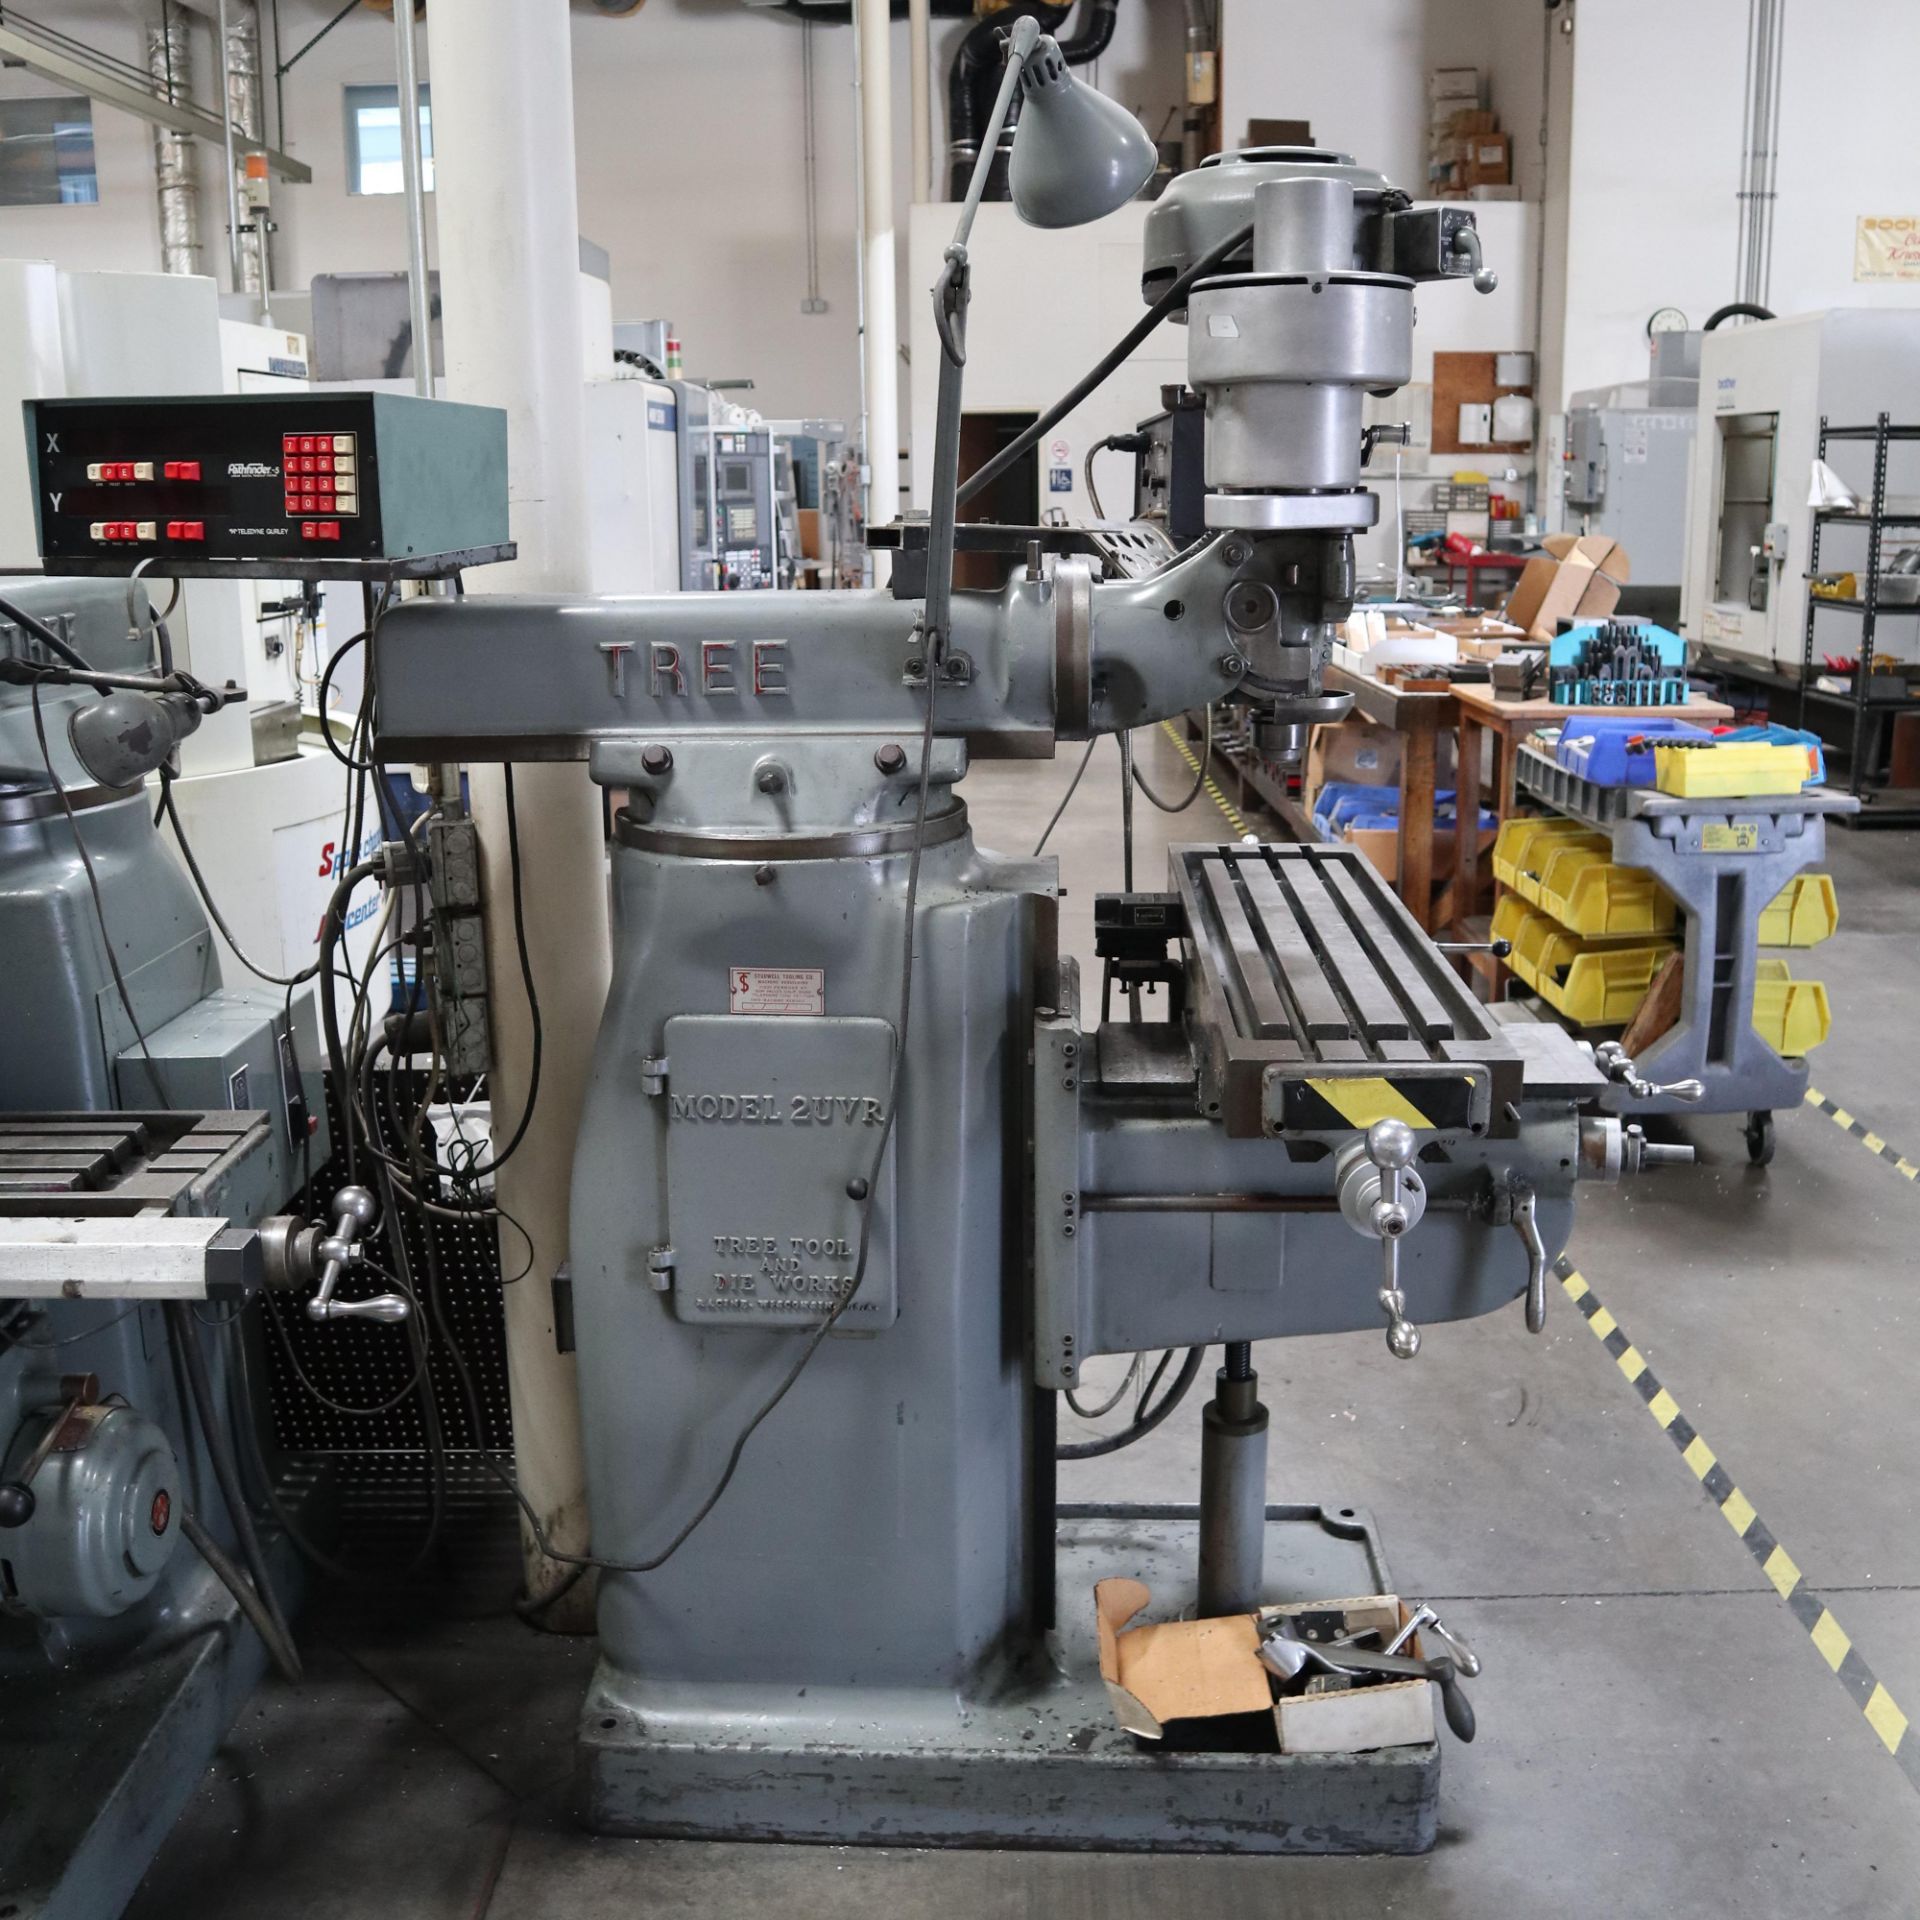 TREE MODEL 2UVR MILLING MACHINE, REBUILT 1975, S/N 1008, WITH TRAK DRO *PLEASE NOTE: ISSUE WITH X - Image 7 of 12